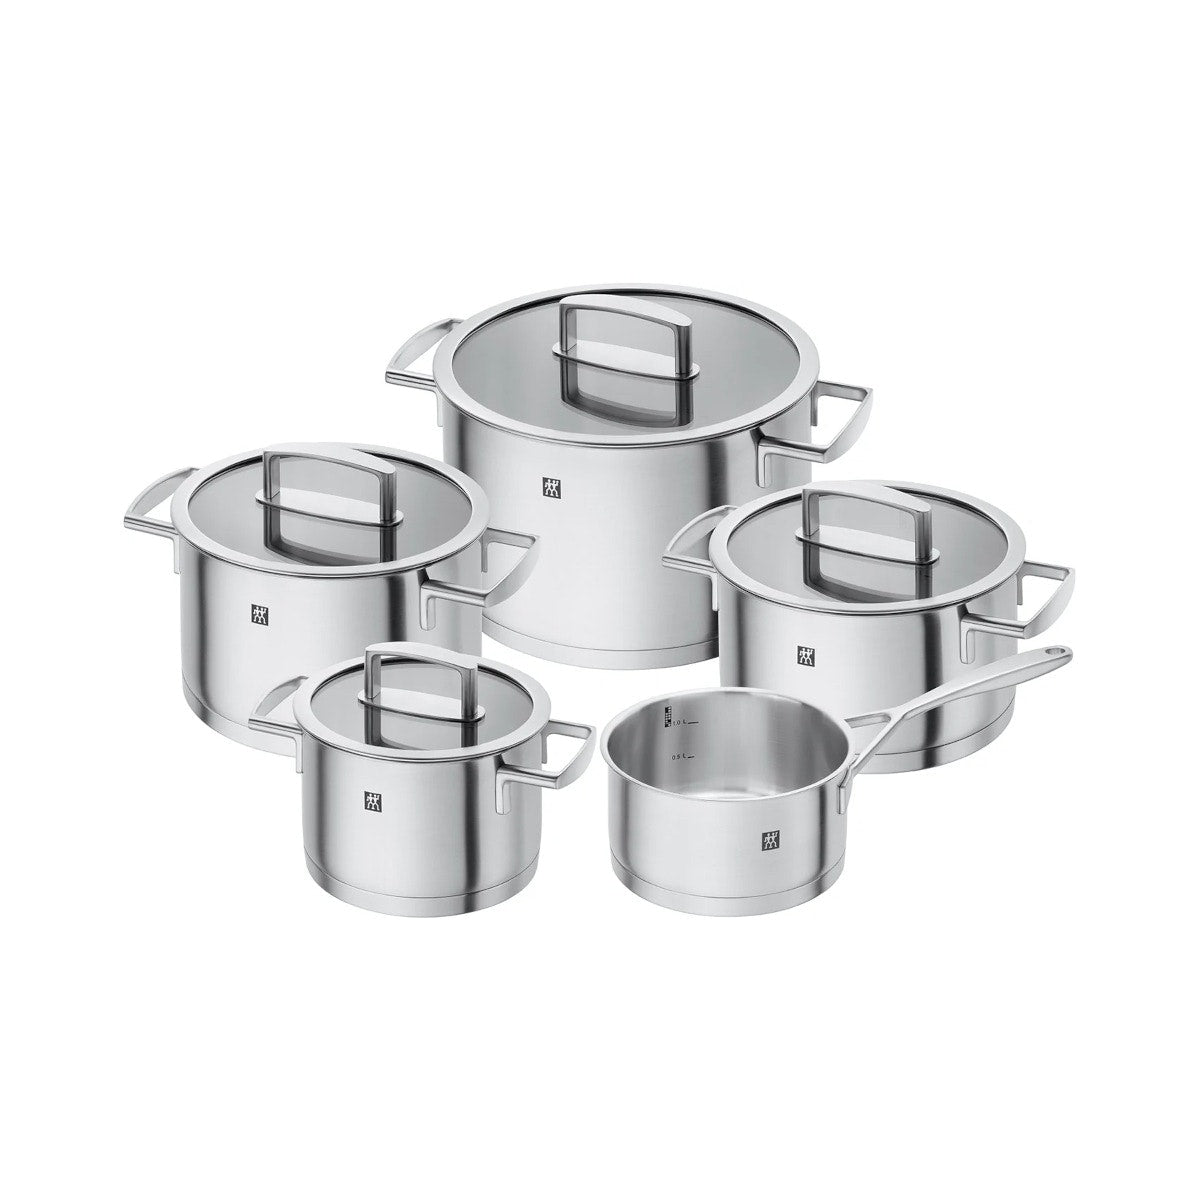 Zwilling Vitality 5pc Cookware Set